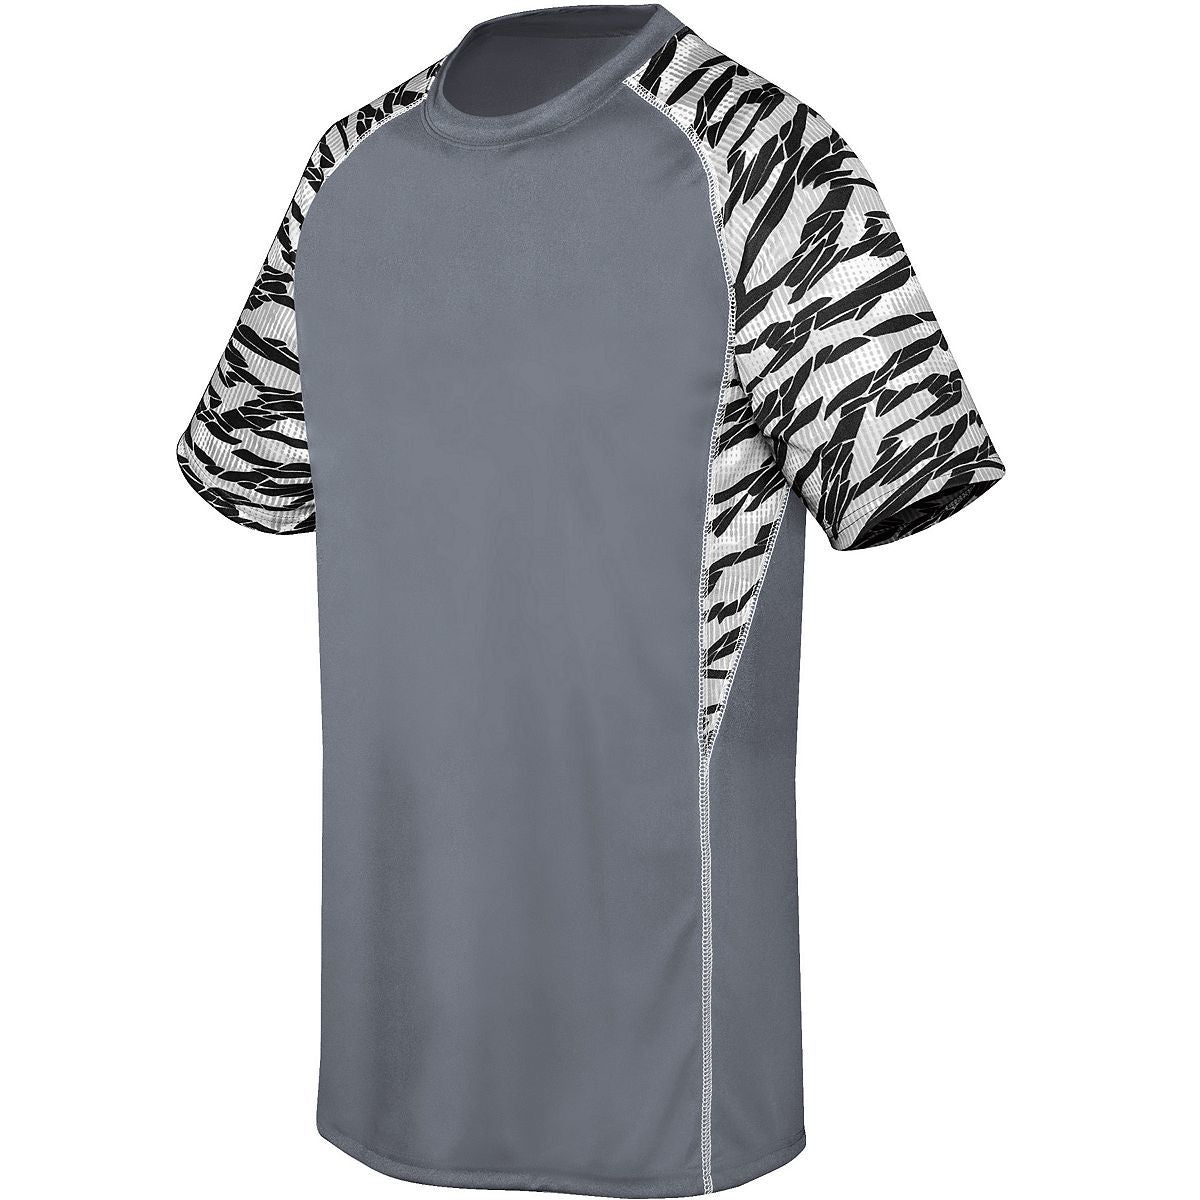 Youth Evolution Printed Short Sleeve Jersey 372331